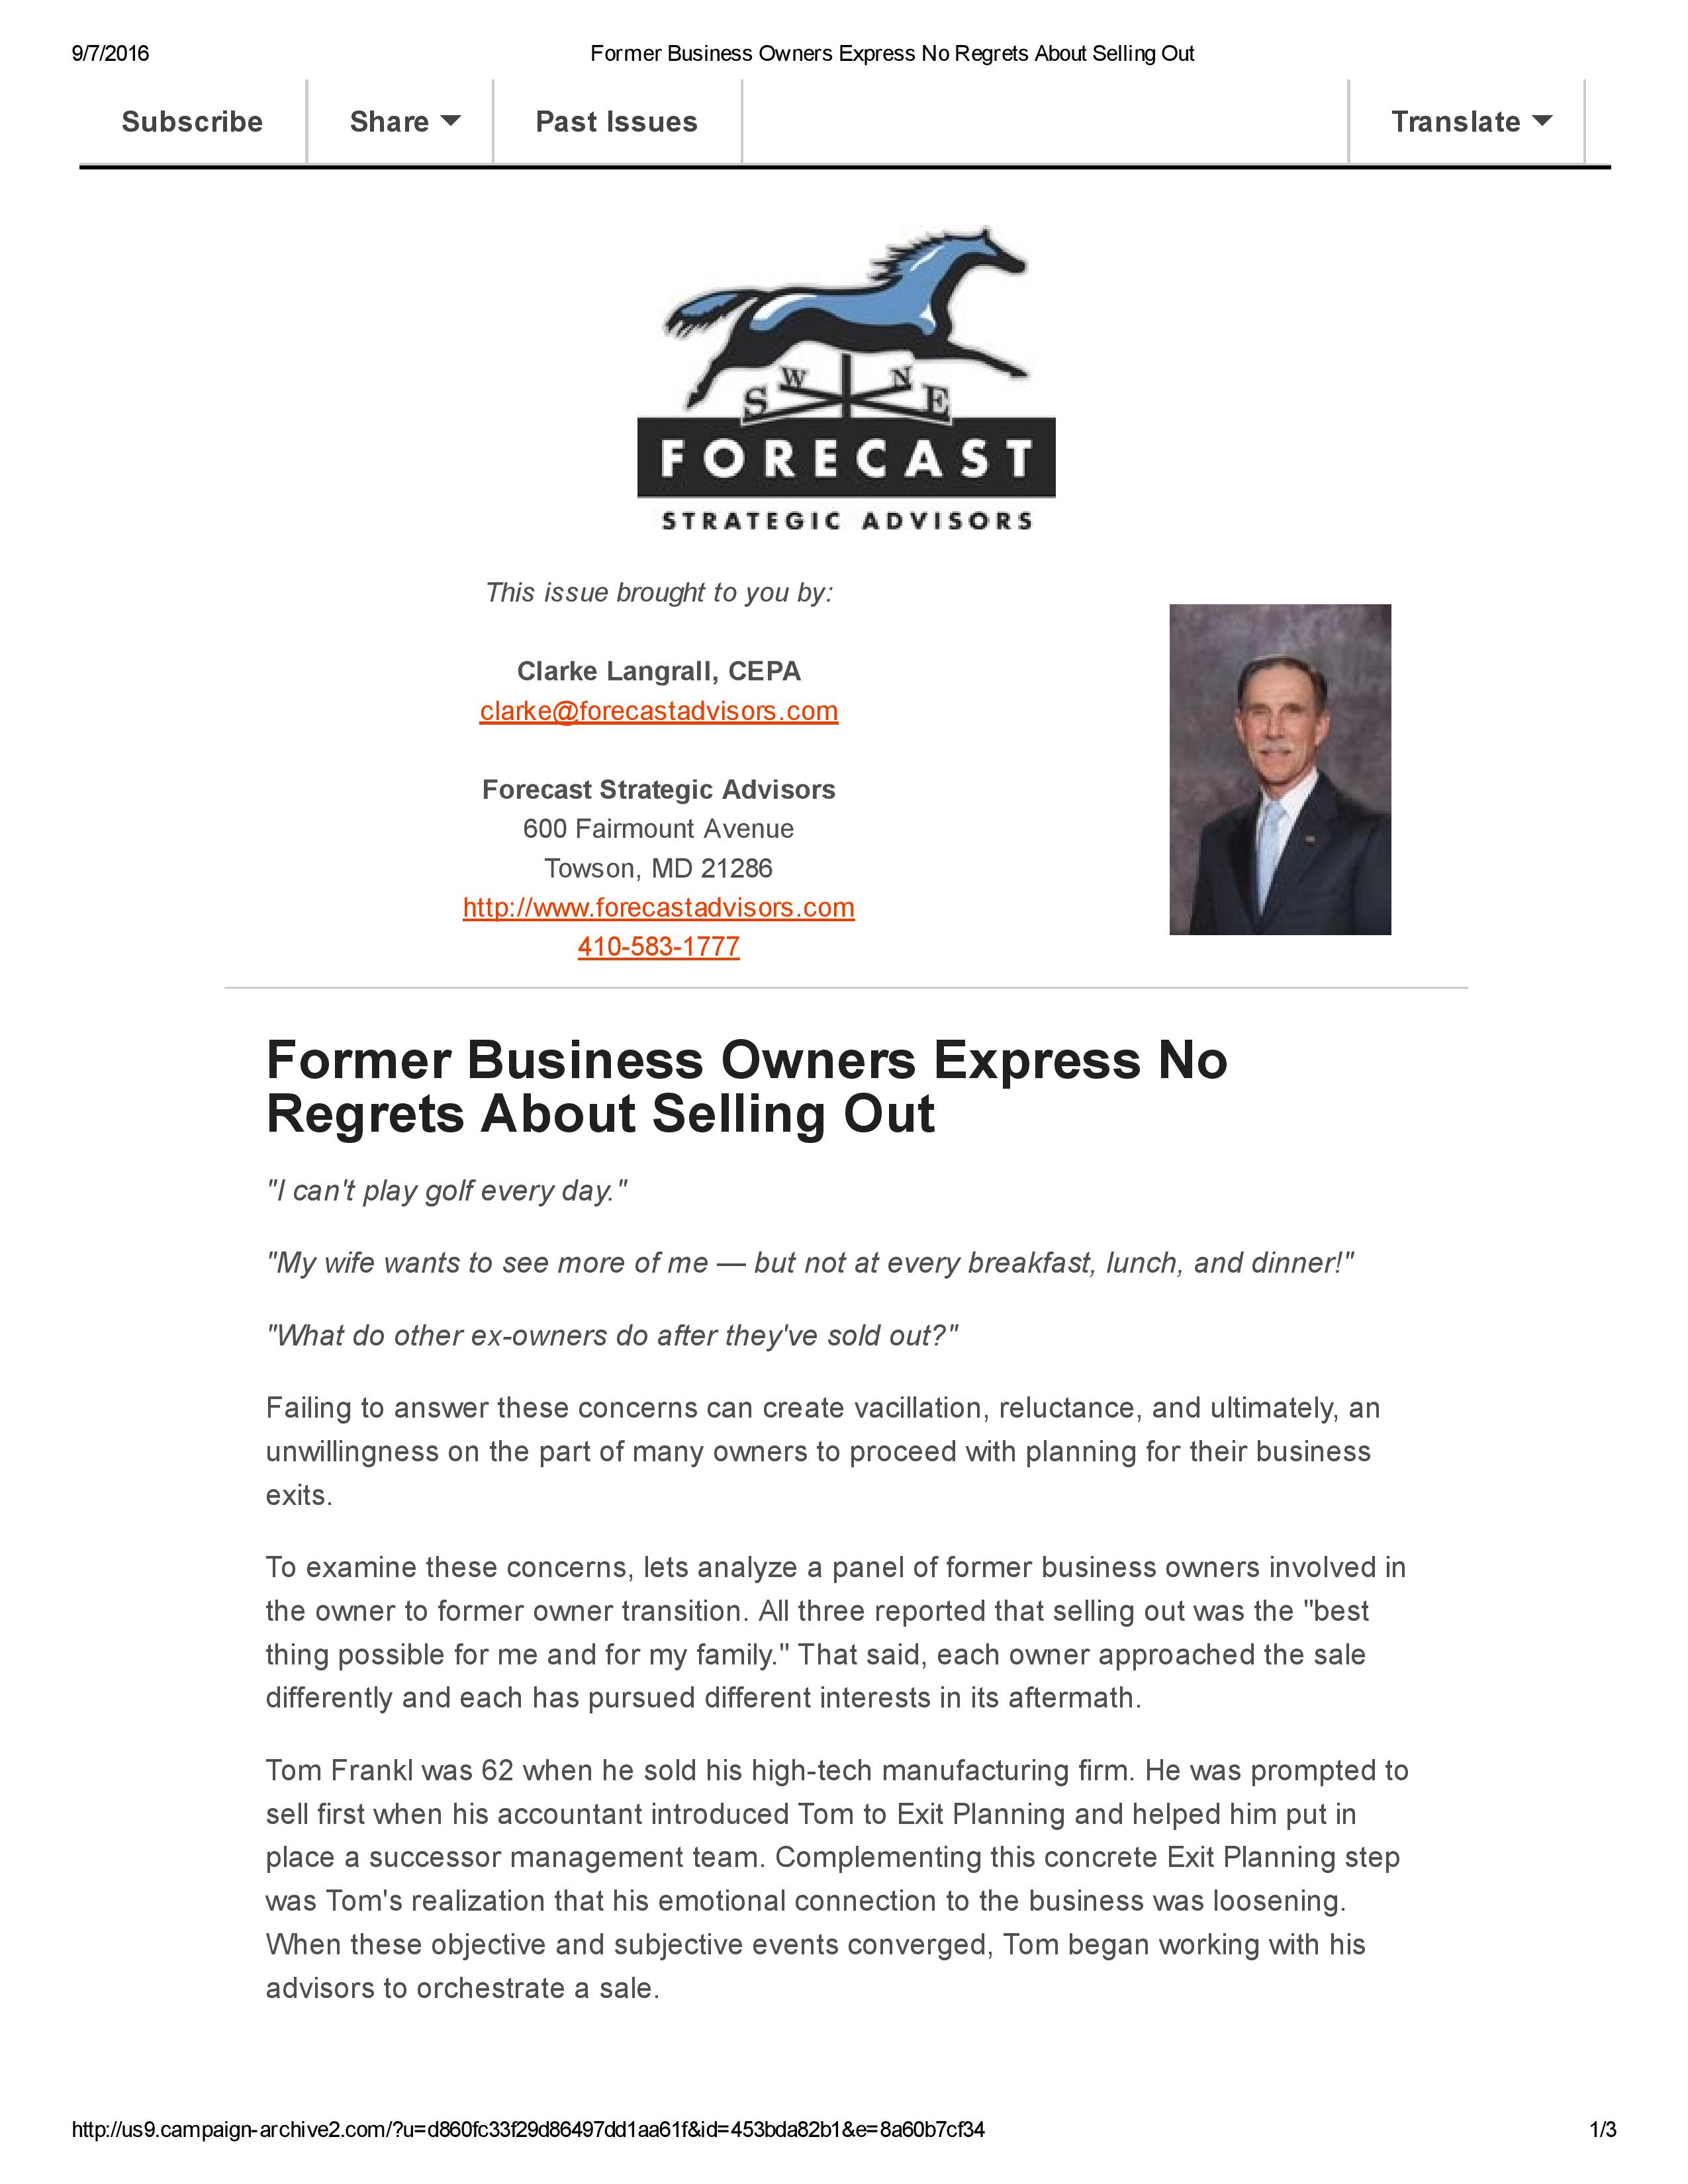 former-business-owners-express-no-regrets-about-selling-out-page-001